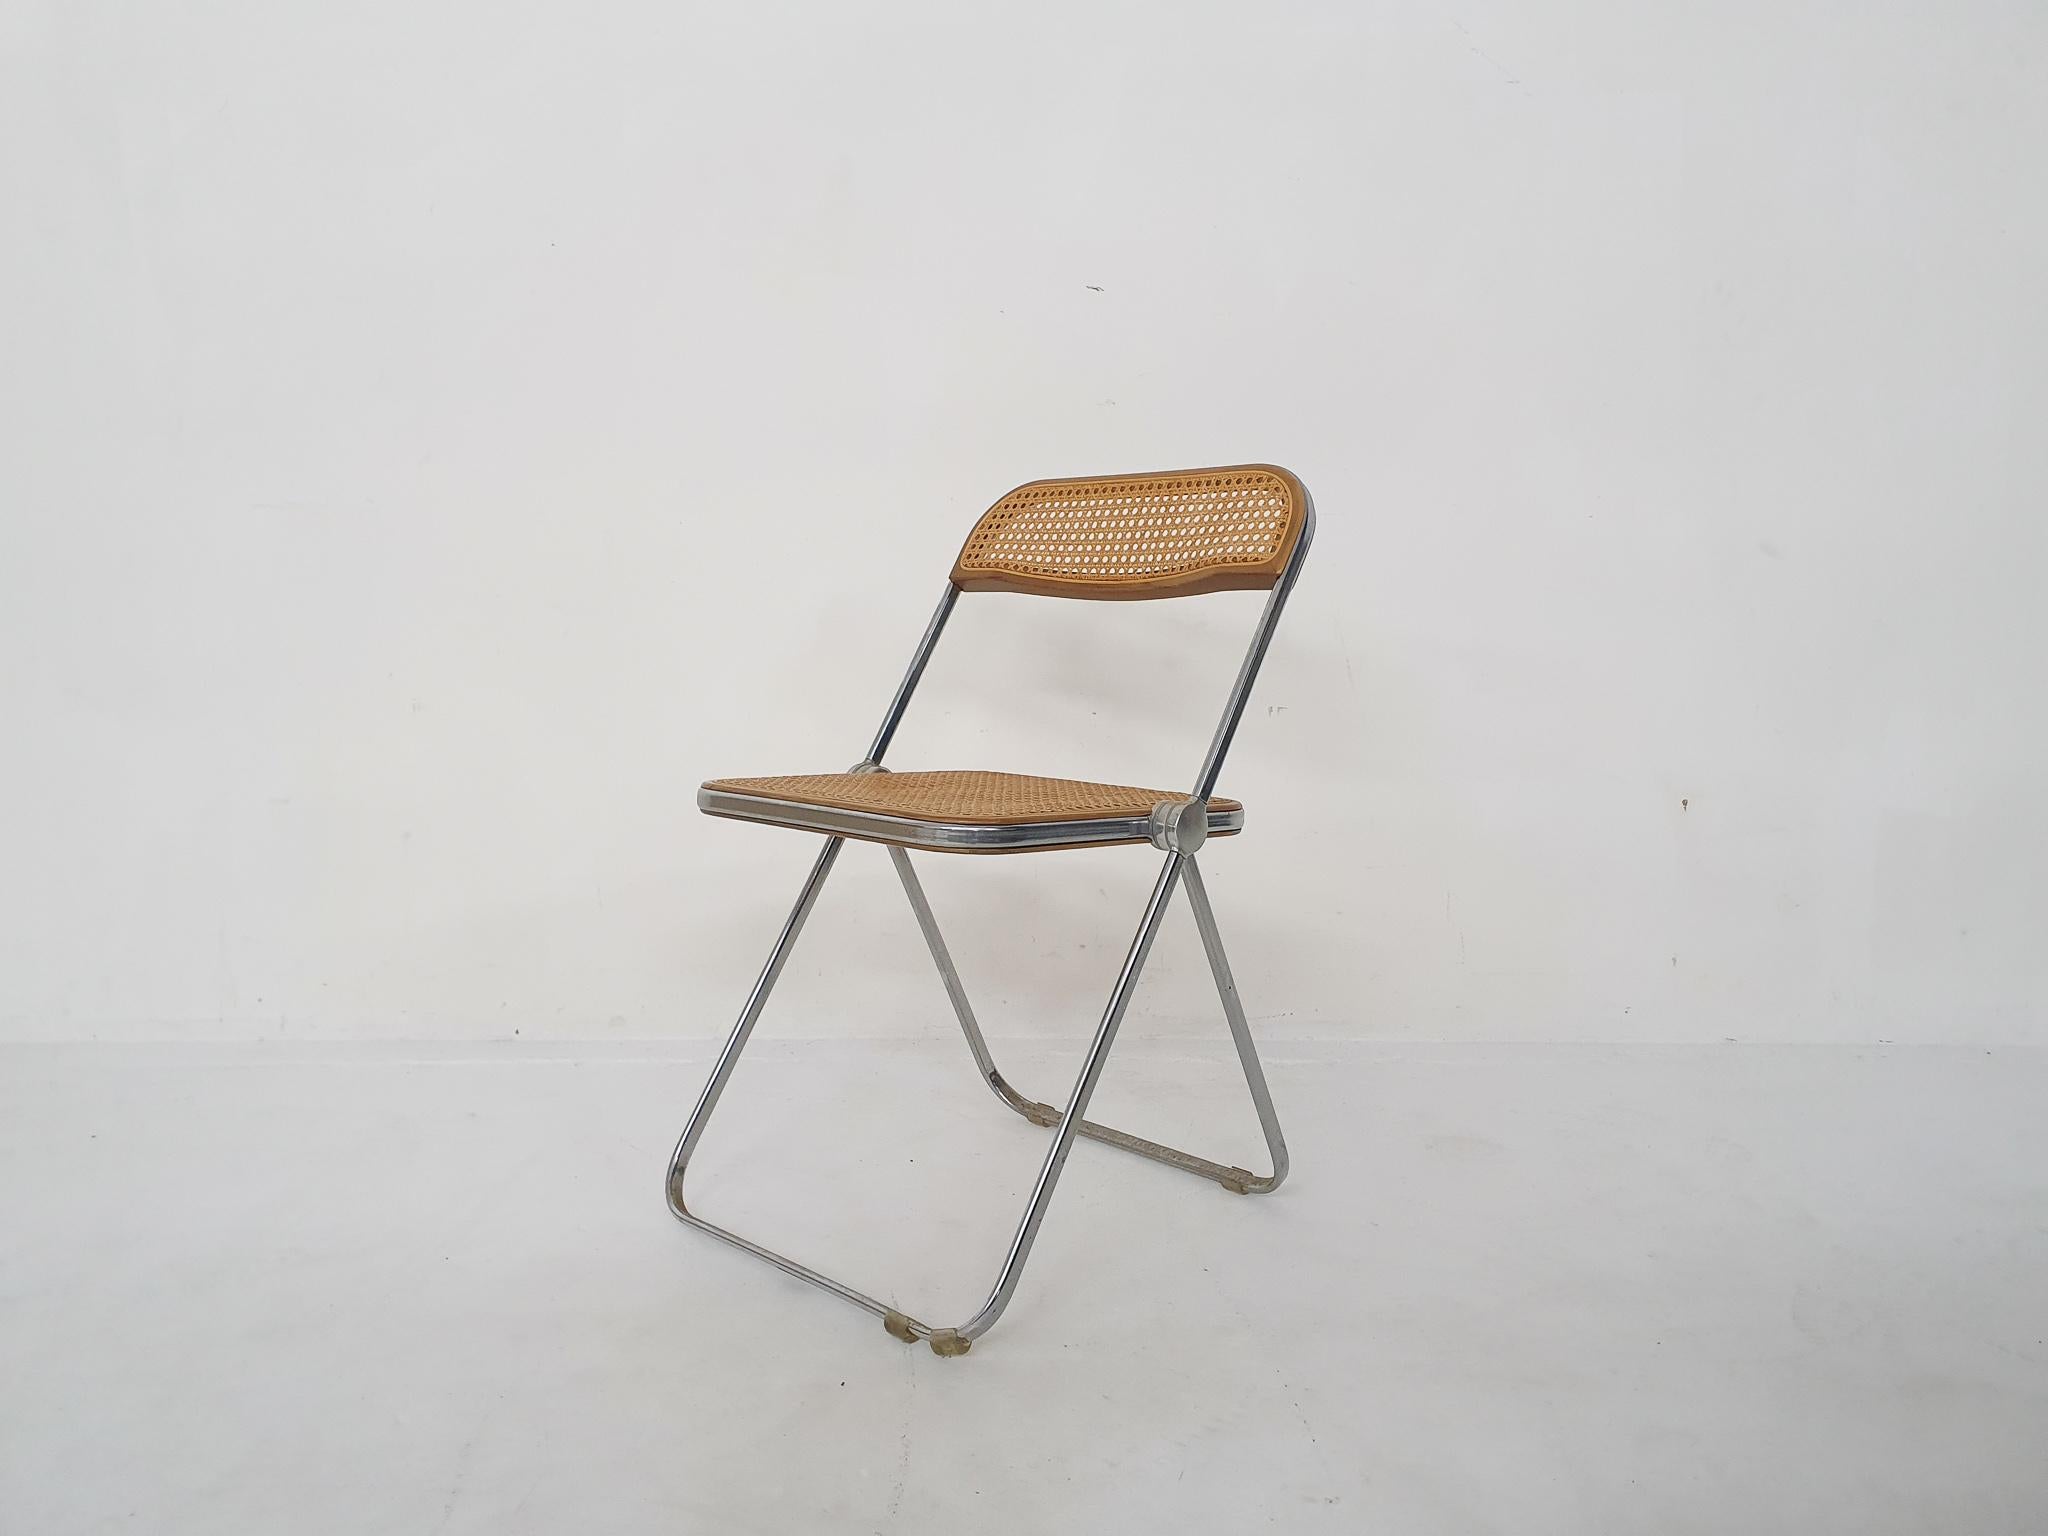 Vintage plia folding chair with webbing seating and back, Designed by Ginacarlo Piretti for Castelli.
In good condition with traces of use.
Dimensions when folded: 5 x 47 x 89 cm.